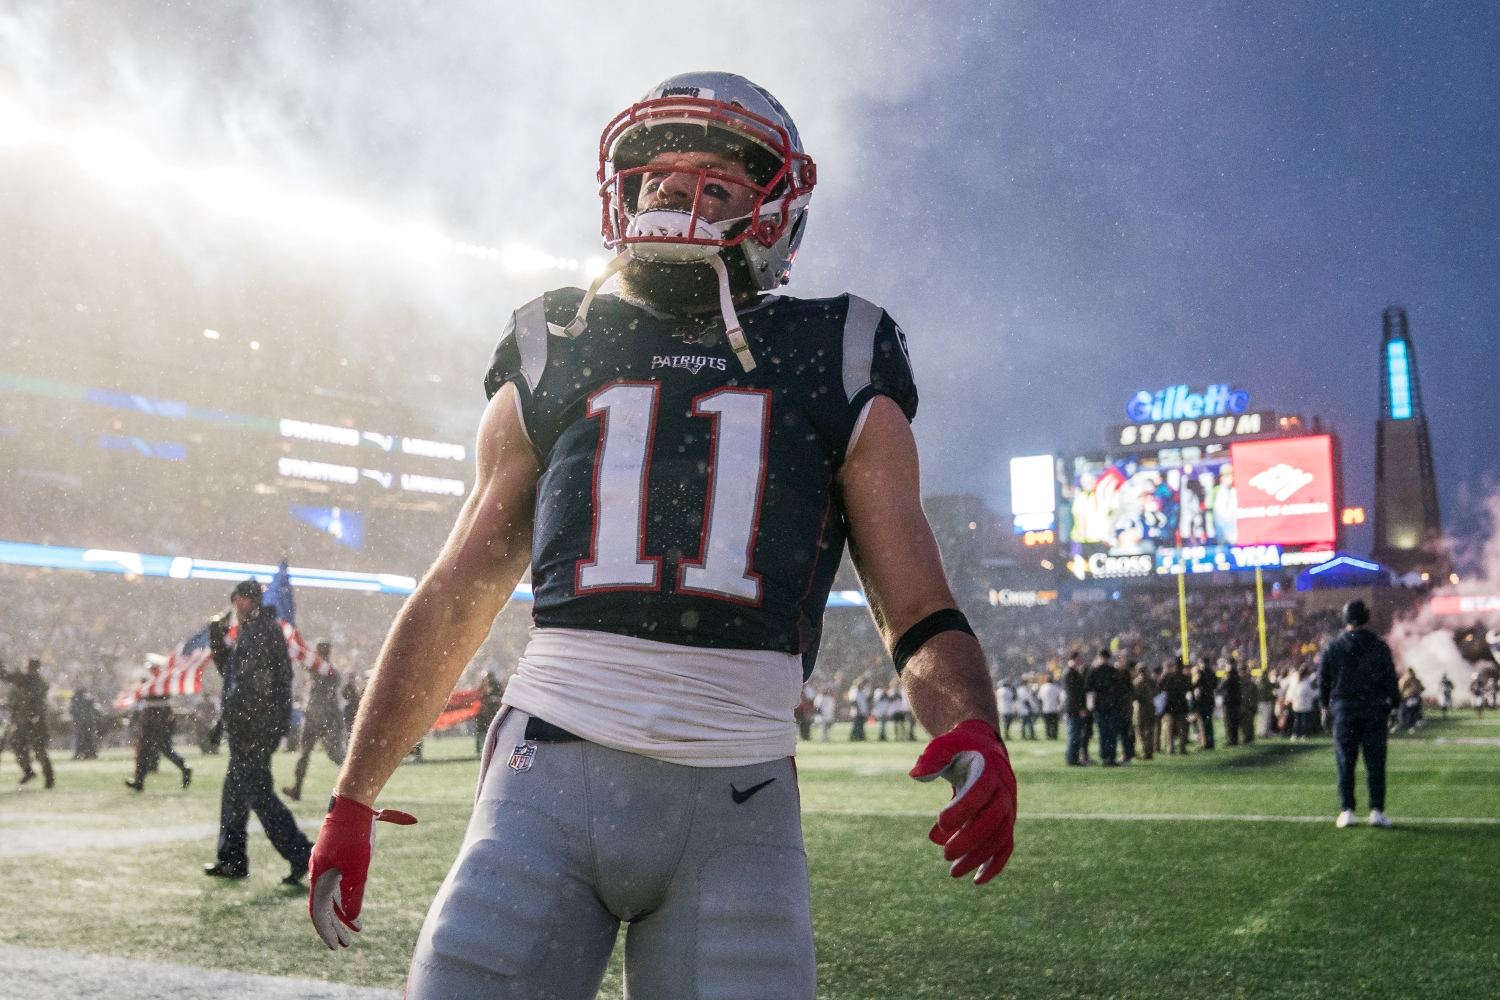 New England Patriots wide receiver Julian Edelman looks up at the crowd before a game.